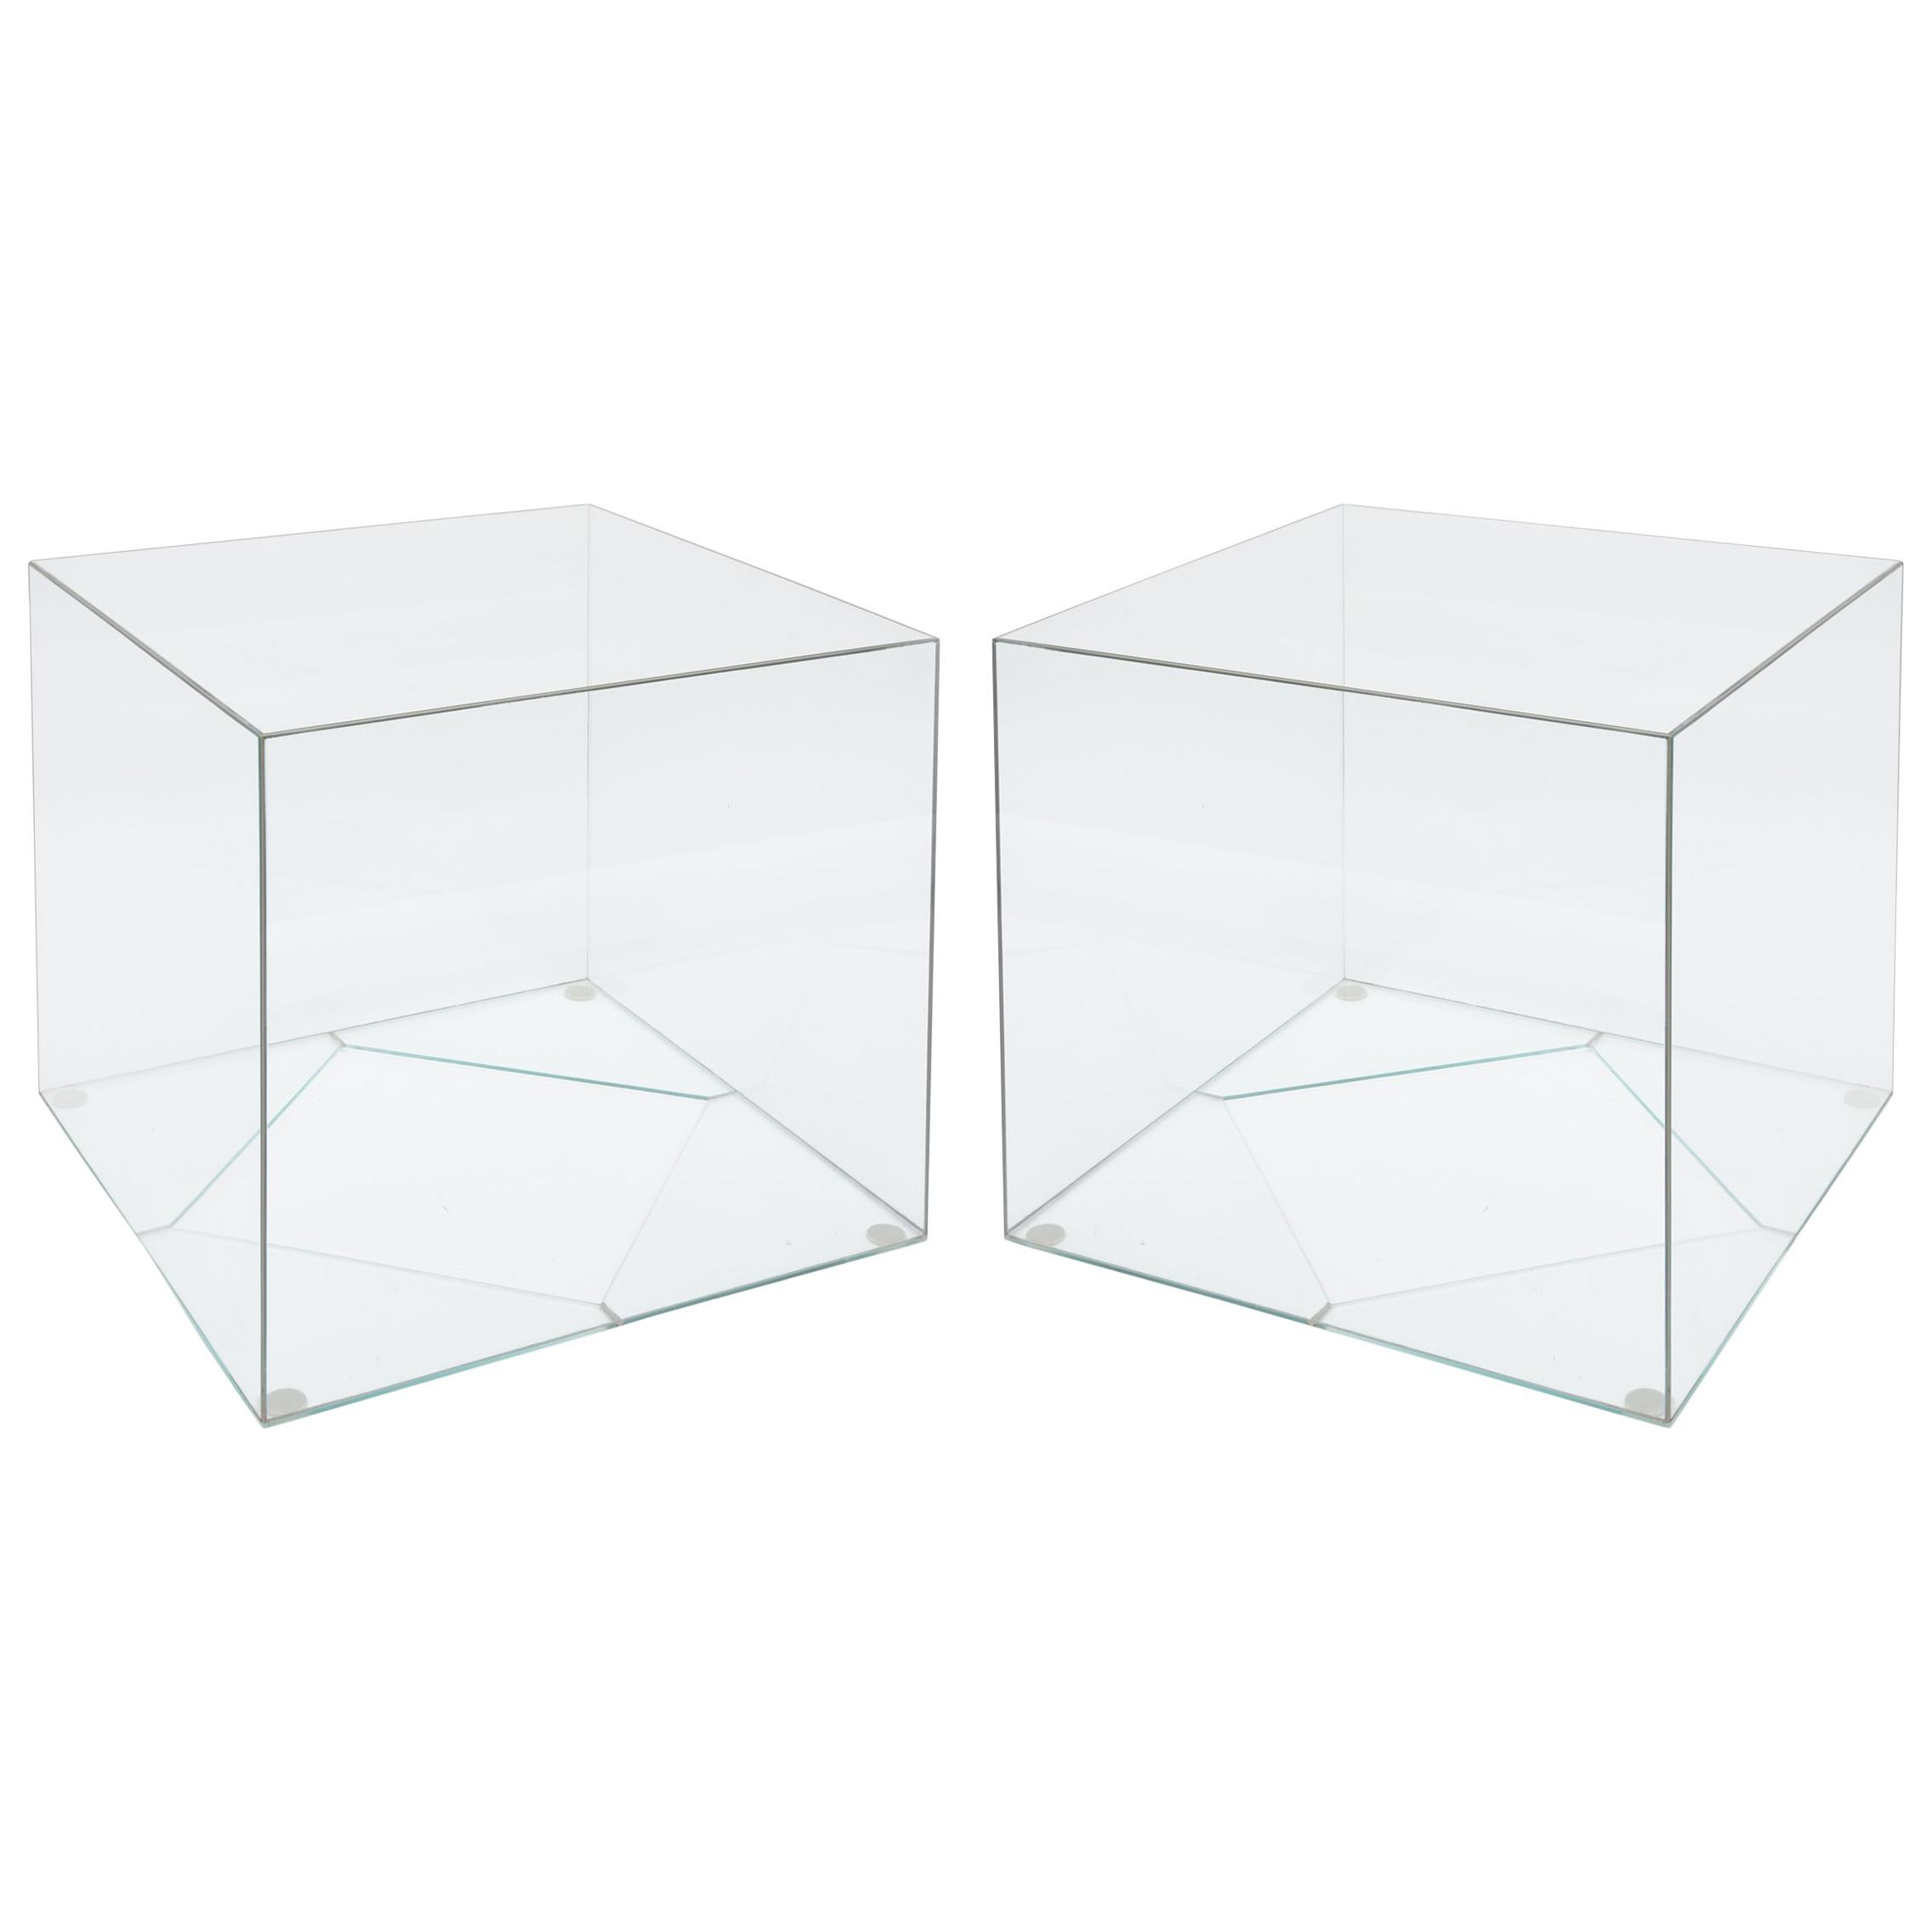 Large Pace Glass Cube Tables